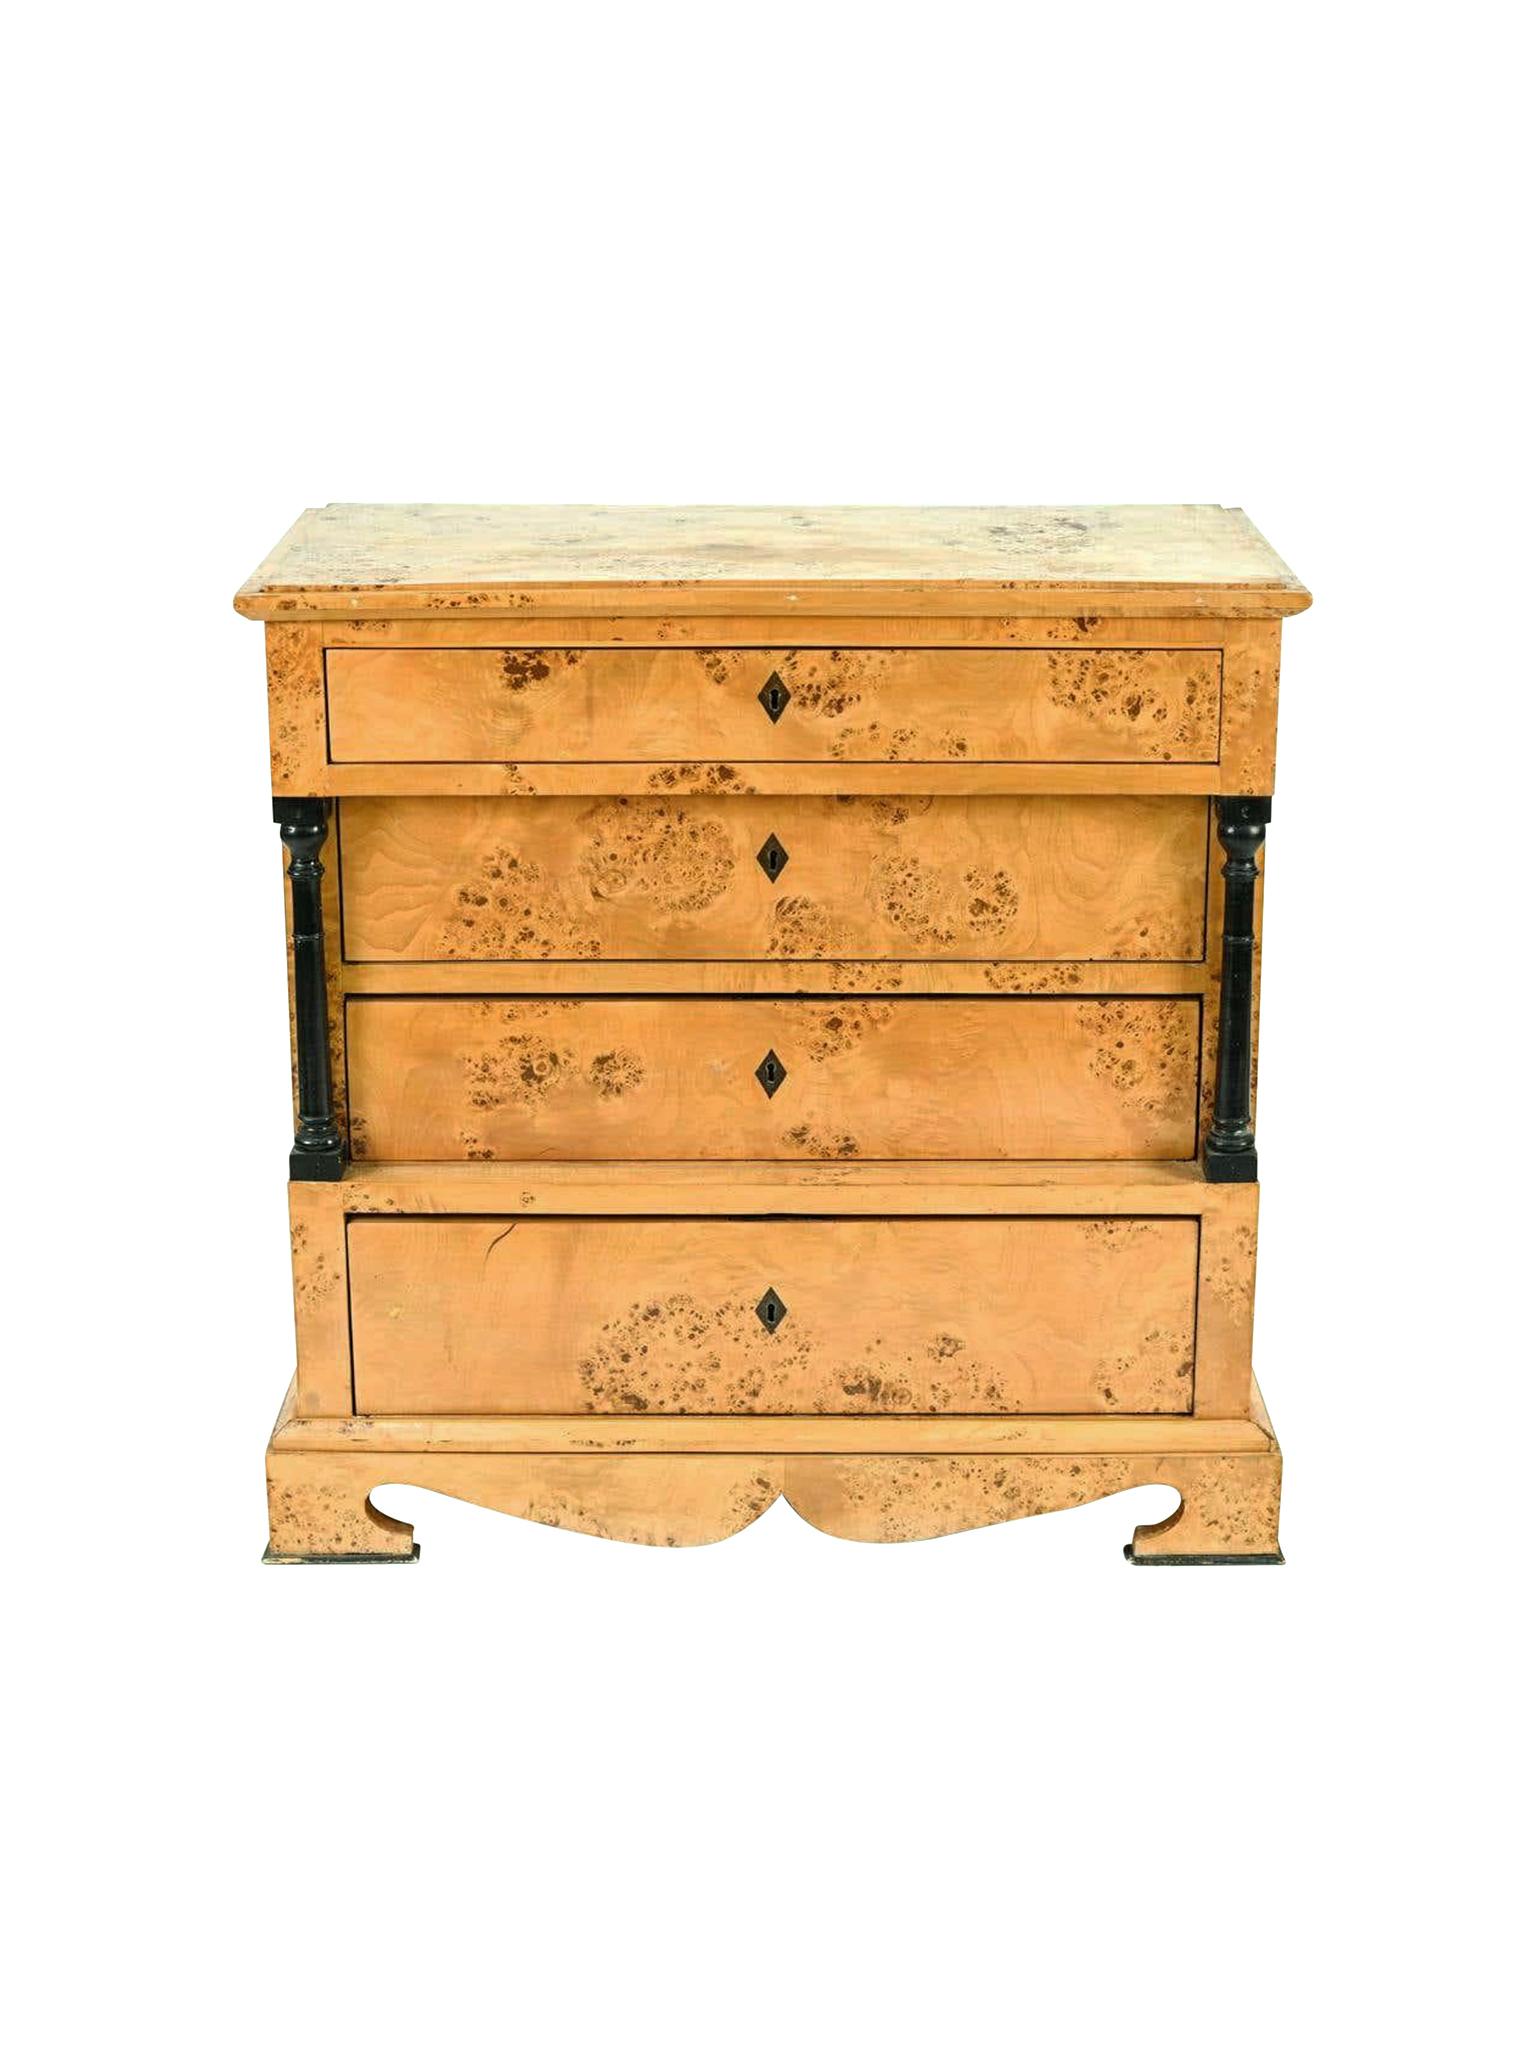 Antique Biedermeier chest of drawers, handcrafted in Sweden in the 19th Century. It's comprised of birch burlwood with ebonized columns and feet trims. The chest is constructed with 4 full-length drawers.

Dimensions:
35.75 in. width
18.75 in.